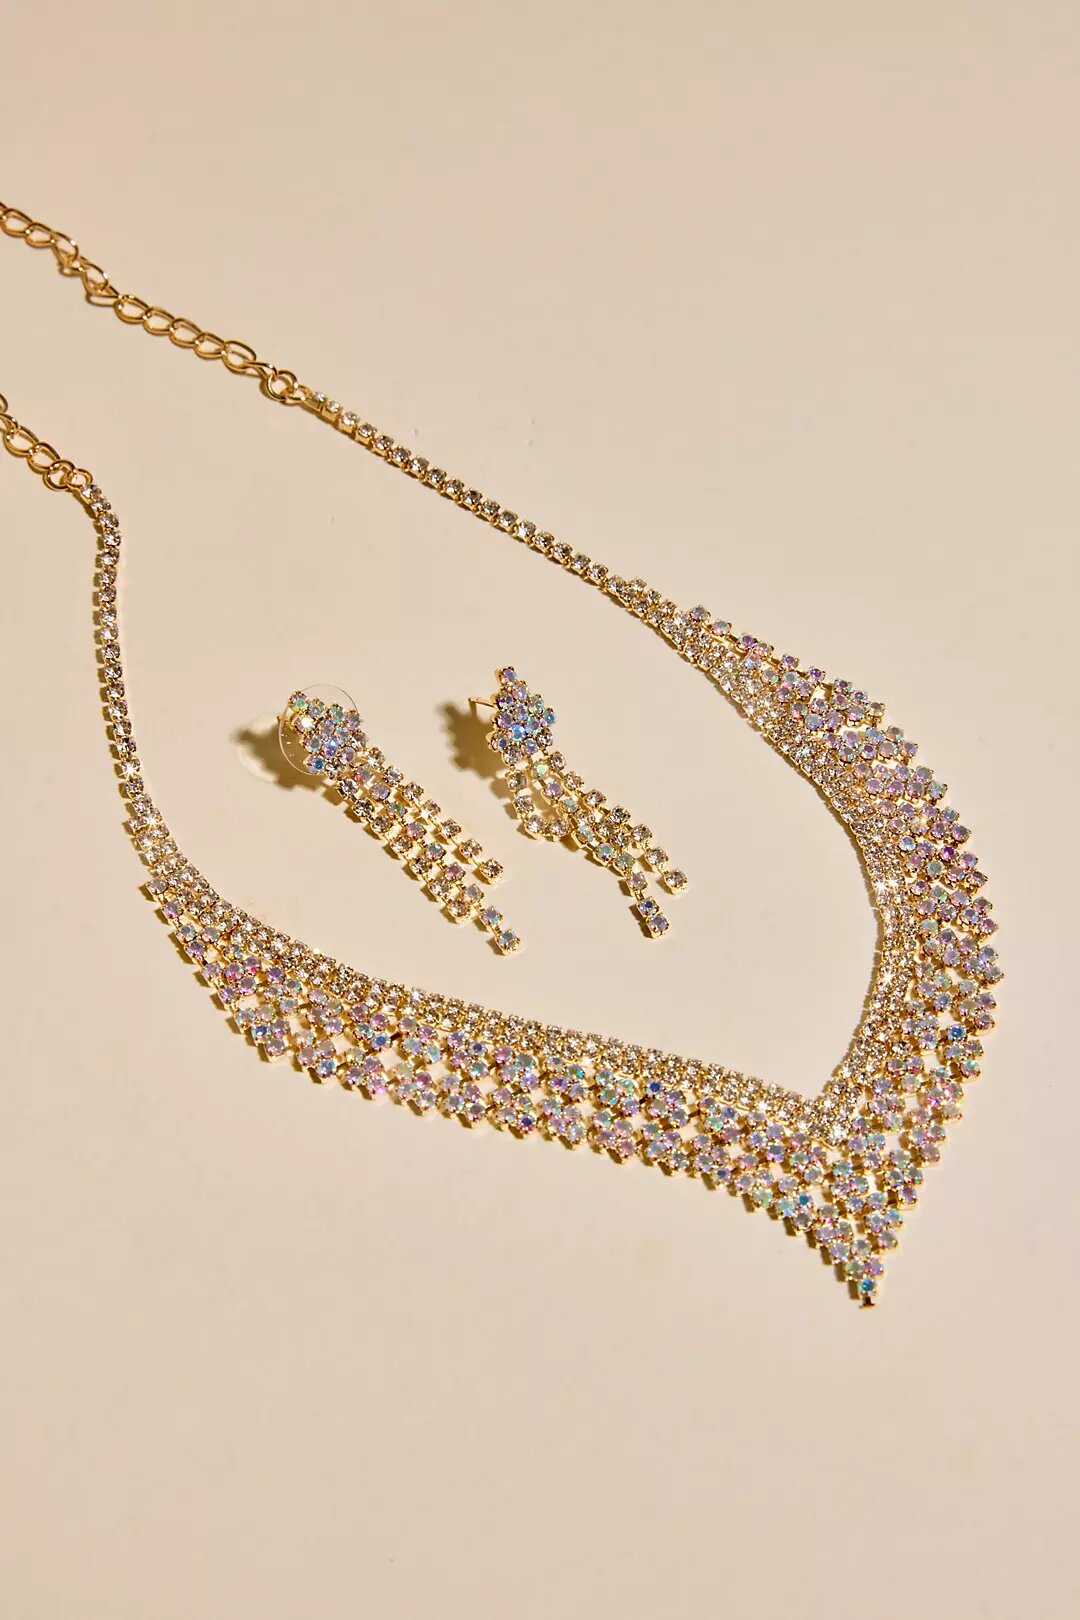 Iridescent Rhinestone Collar Necklace and Earrings